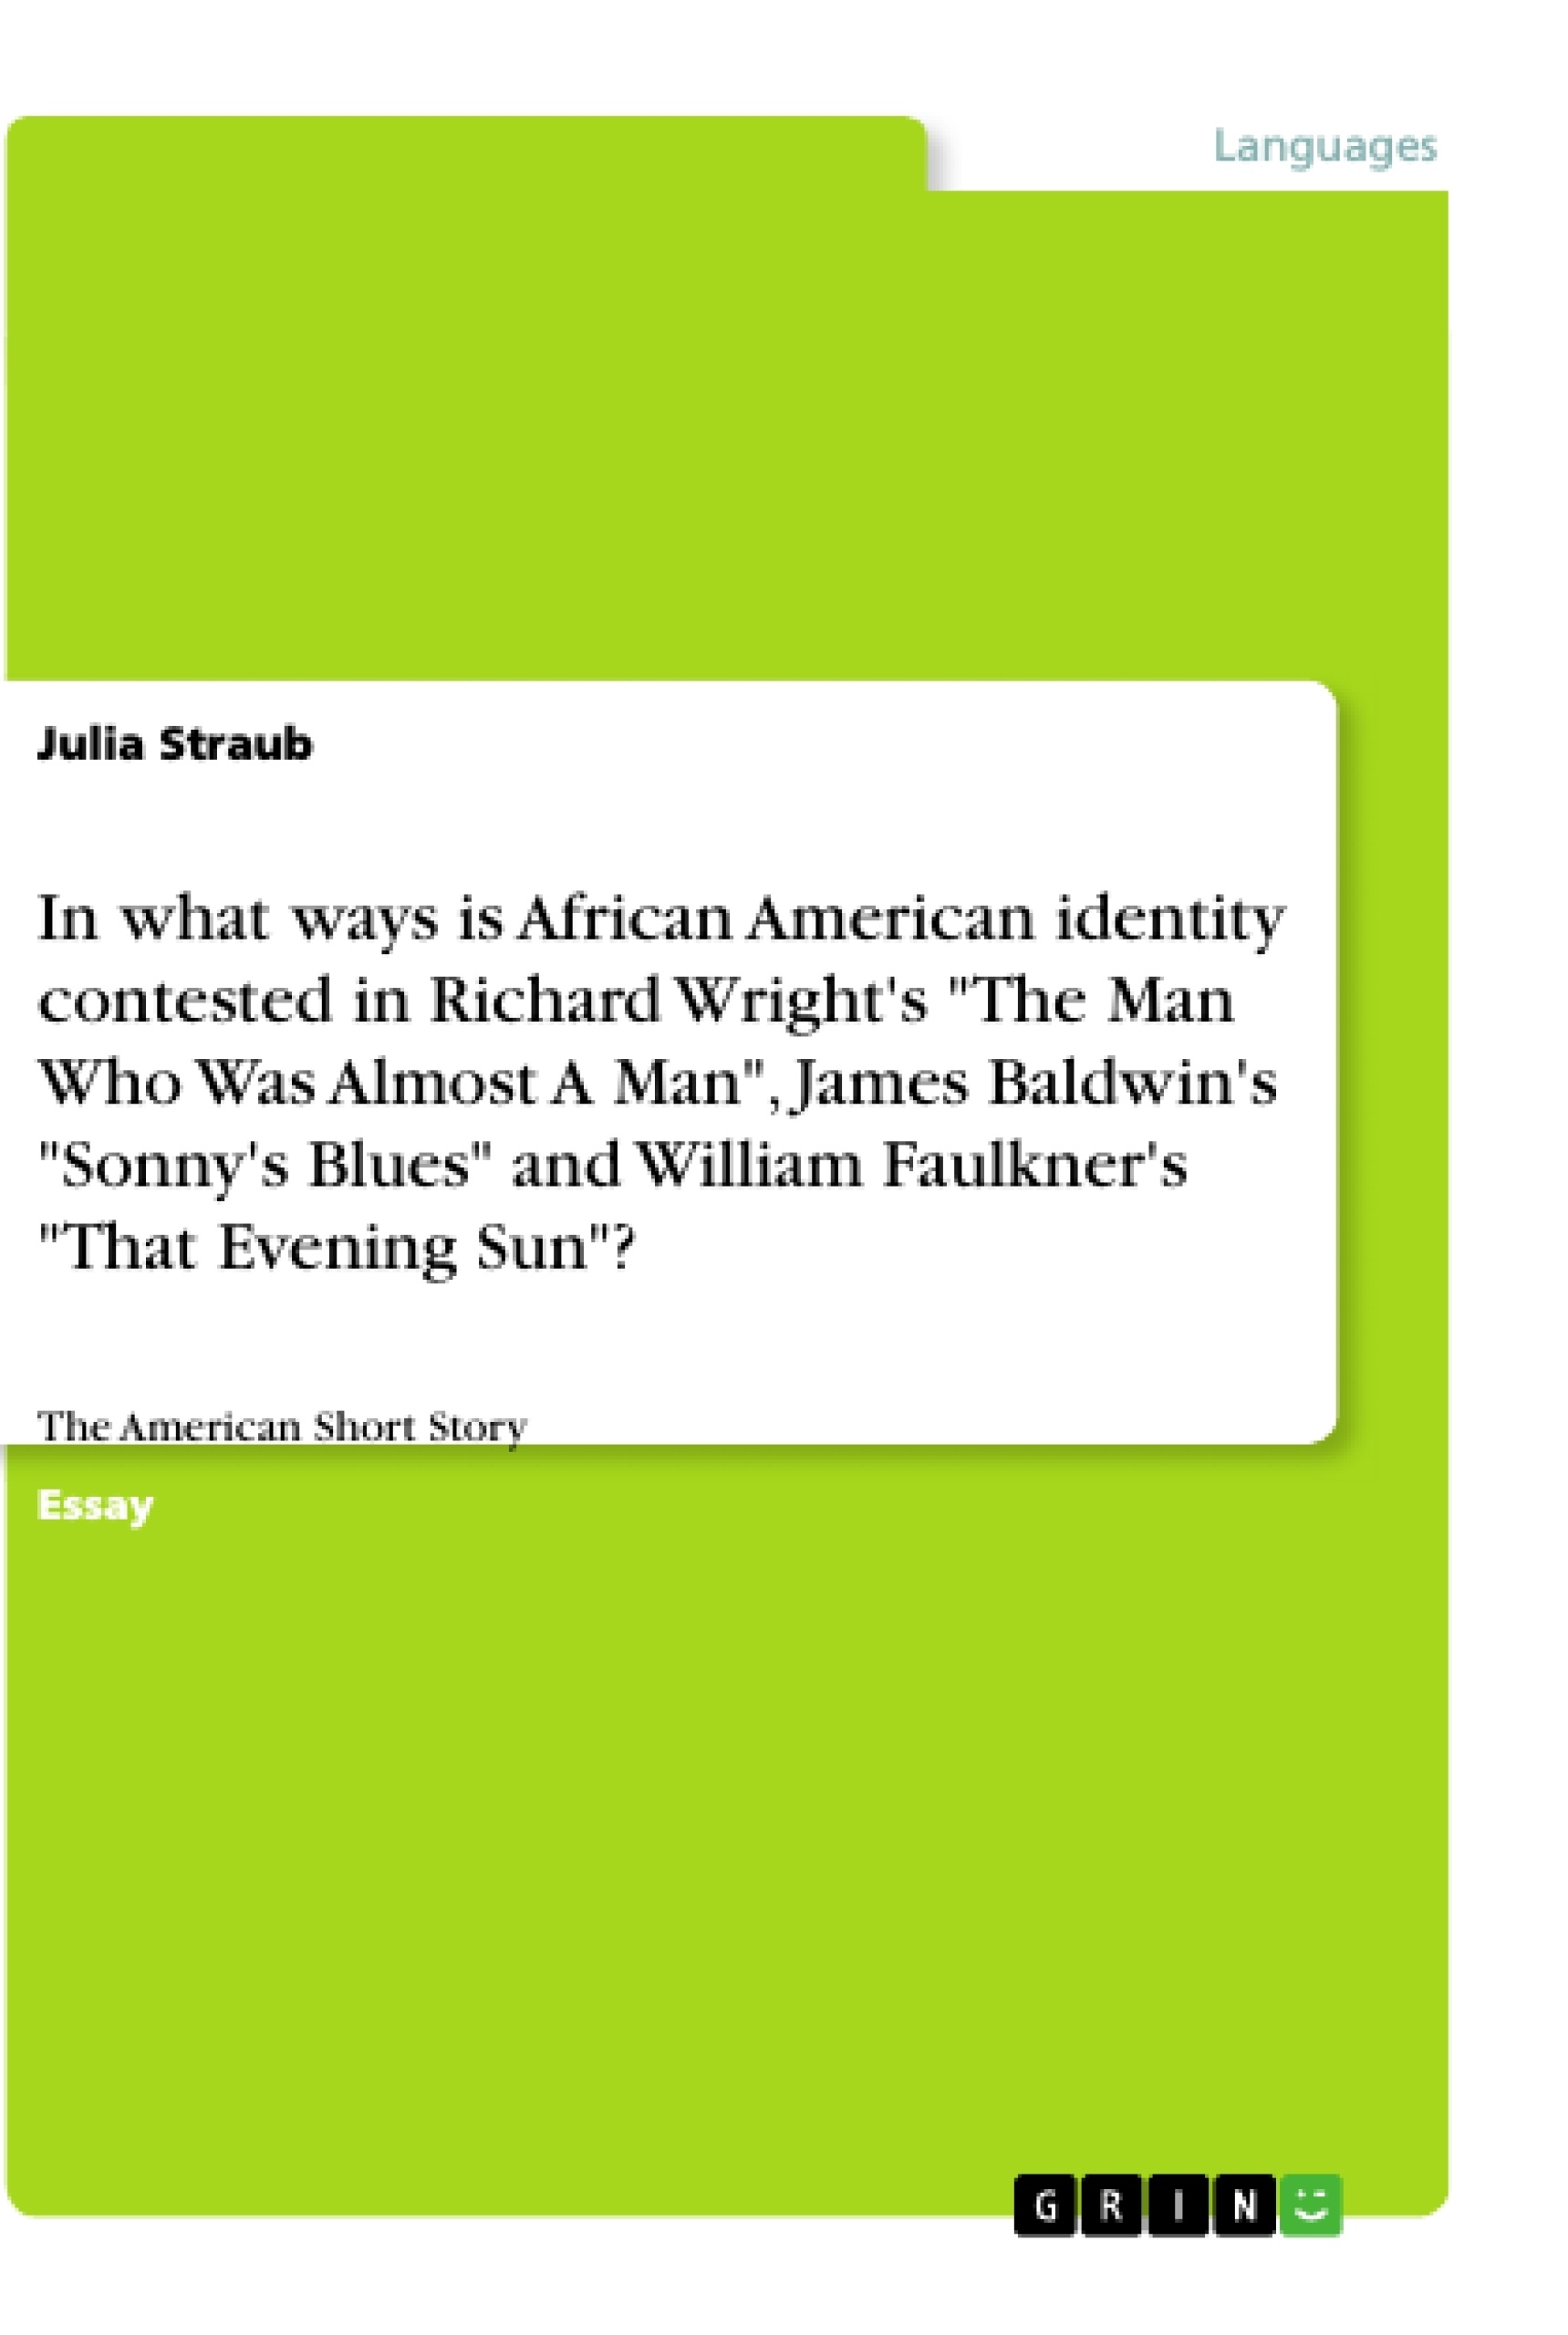 Title: In what ways is African American identity contested in Richard Wright's "The Man Who Was Almost A Man", James Baldwin's "Sonny's Blues" and William Faulkner's "That Evening Sun"?